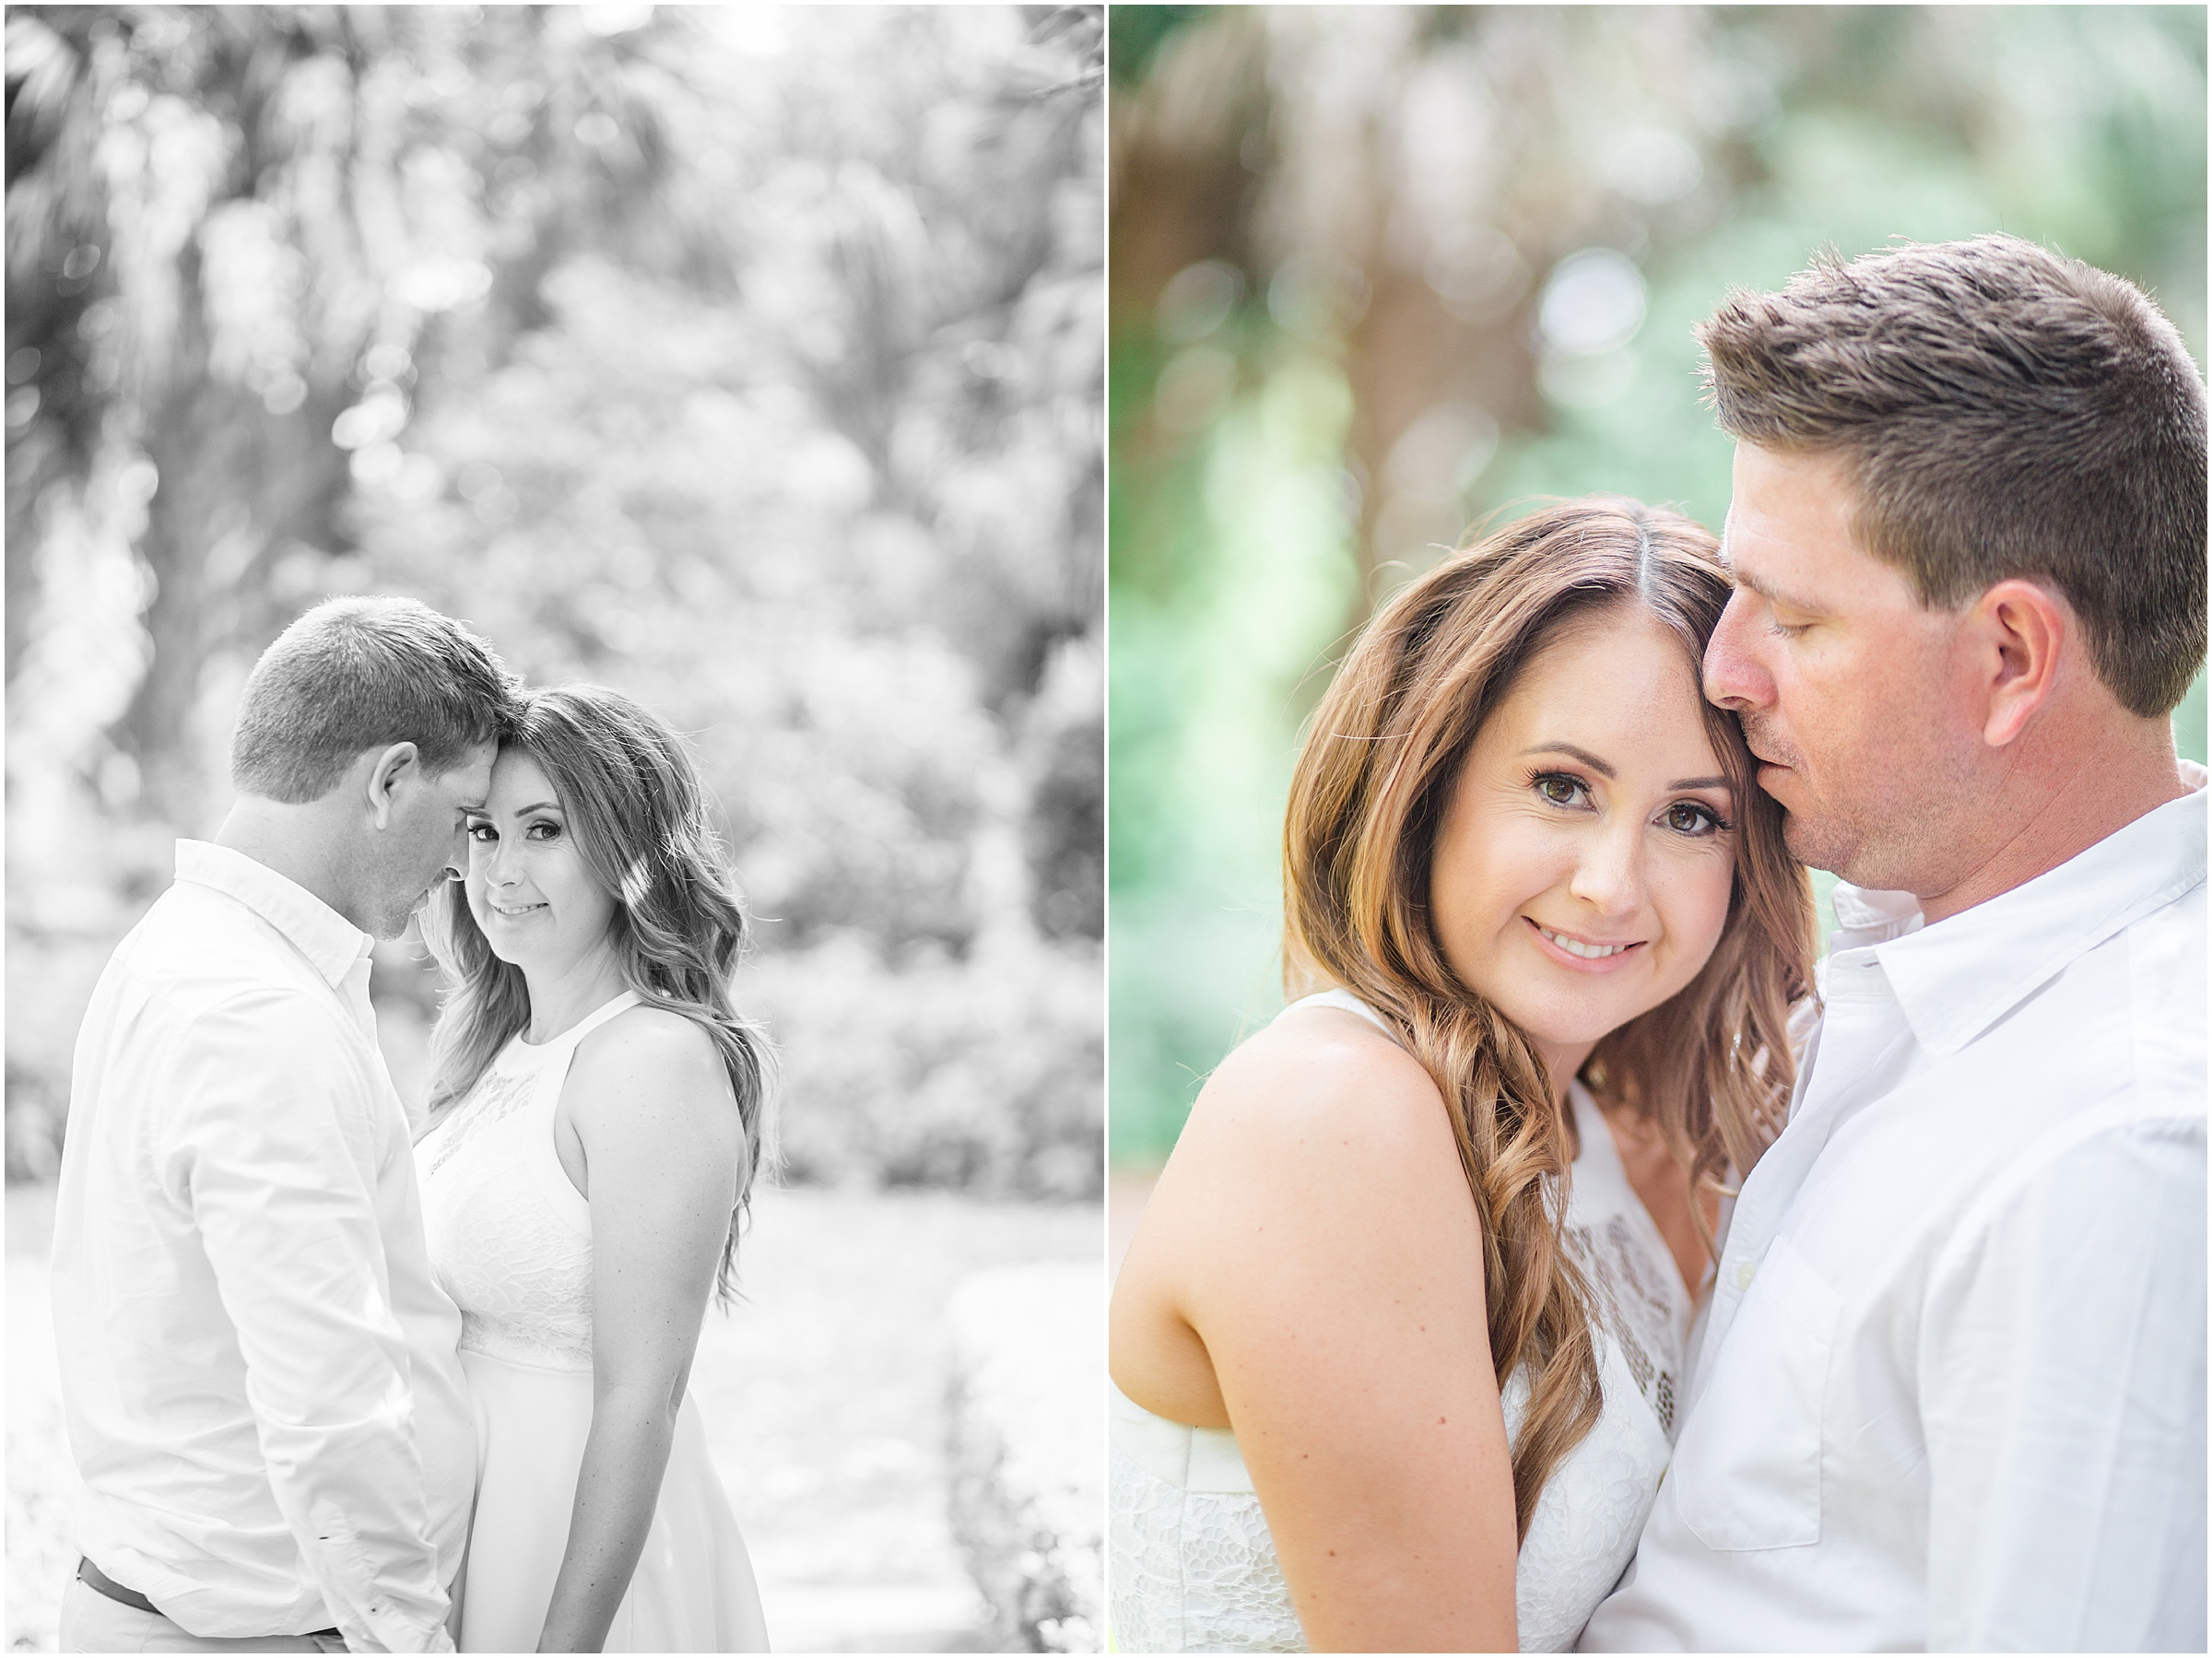 Jessica & Brad, newly engaged, at Bok Tower Gardens and Pinewood Estate in Lake Wales, Florida.